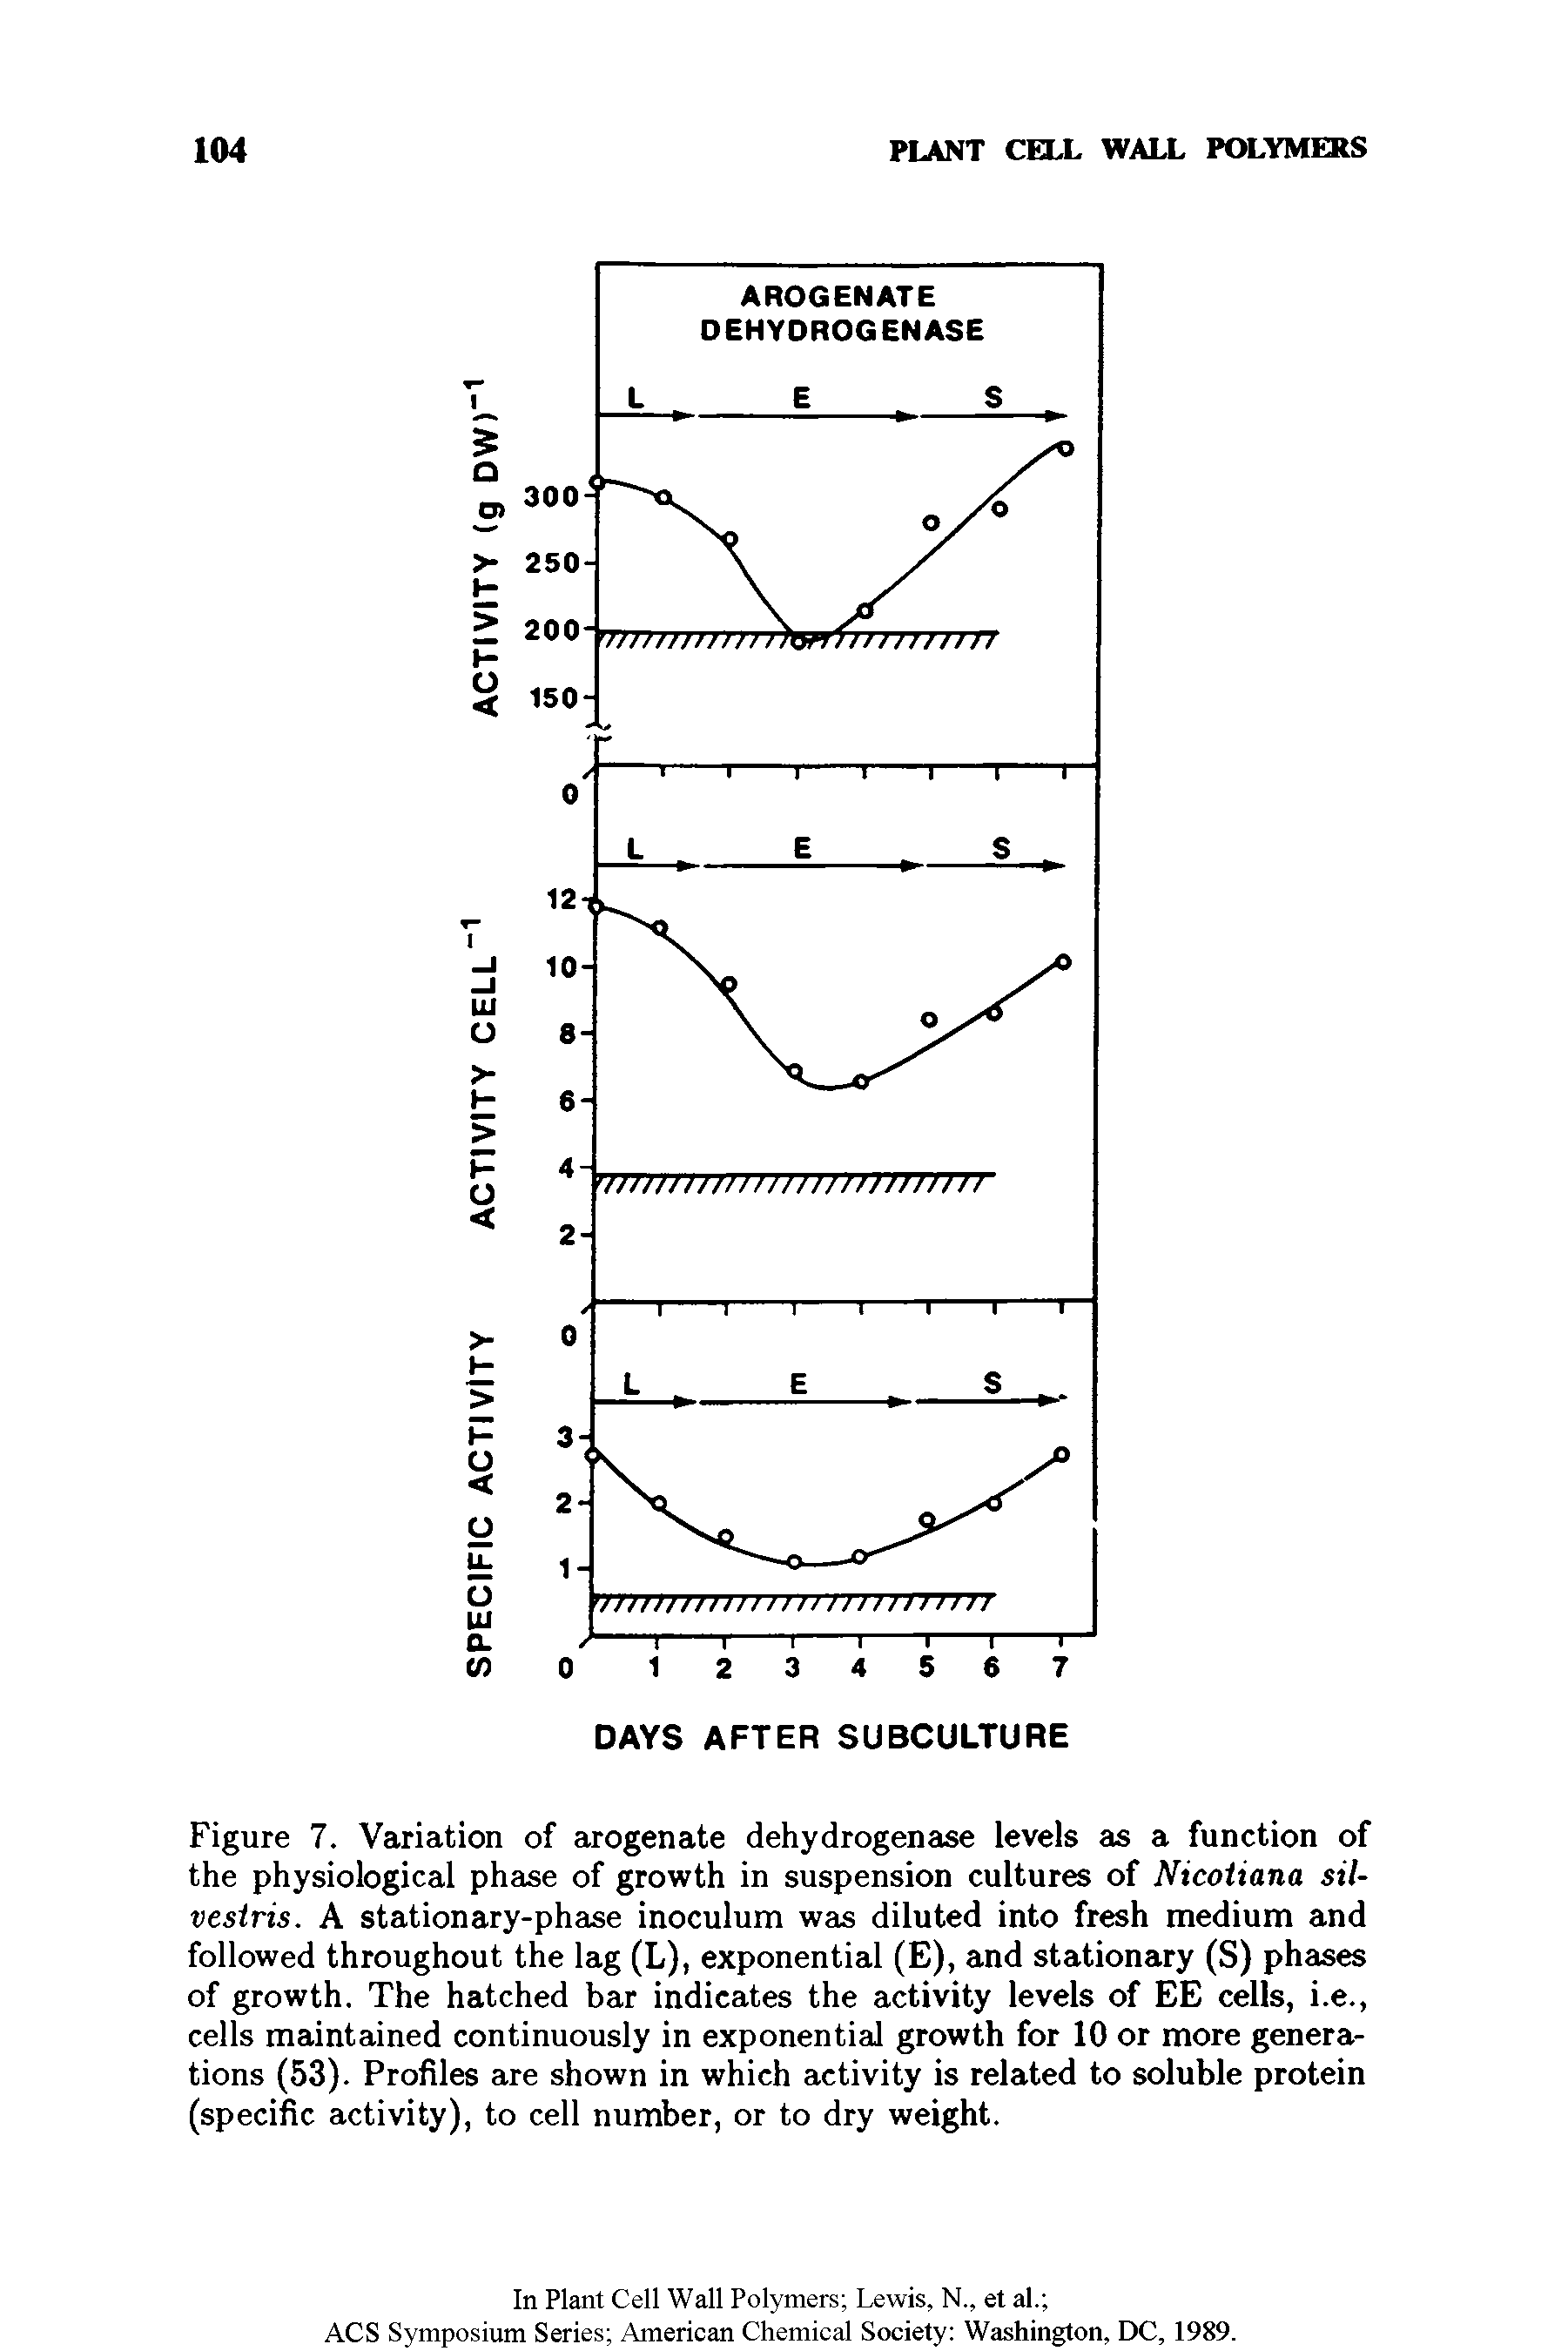 Figure 7. Variation of arogenate dehydrogenase levels as a function of the physiological phase of growth in suspension cultures of Nicotiana sil-vestris. A stationary-phase inoculum was diluted into fresh medium and followed throughout the lag (L), exponential (E), and stationary (S) phases of growth. The hatched bar indicates the activity levels of EE cells, i.e., cells maintained continuously in exponential growth for 10 or more generations (53). Profiles are shown in which activity is related to soluble protein (specific activity), to cell number, or to dry weight.